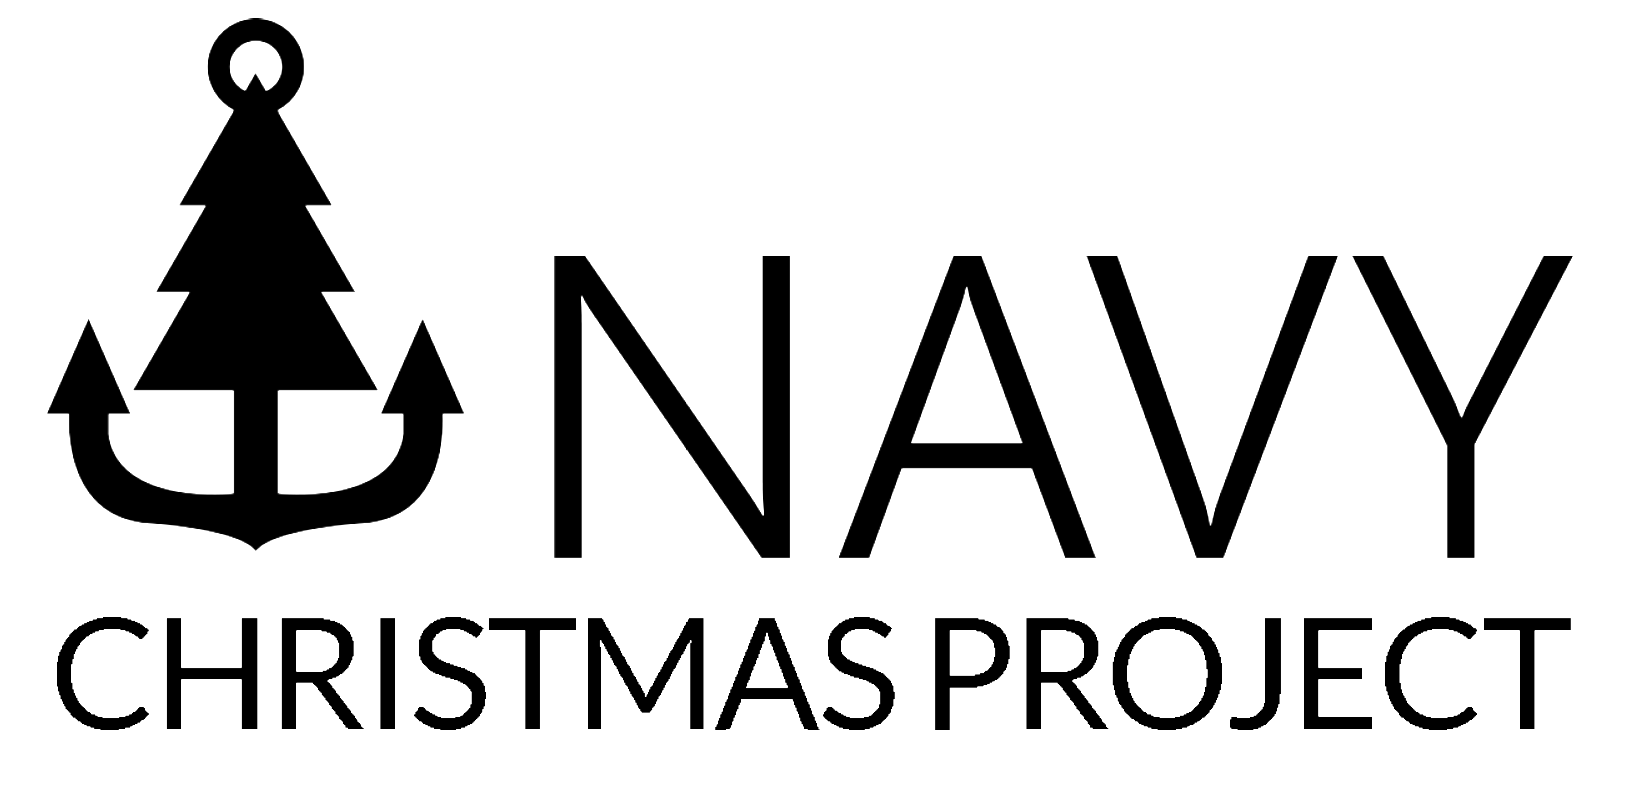 Navy Christmas Project